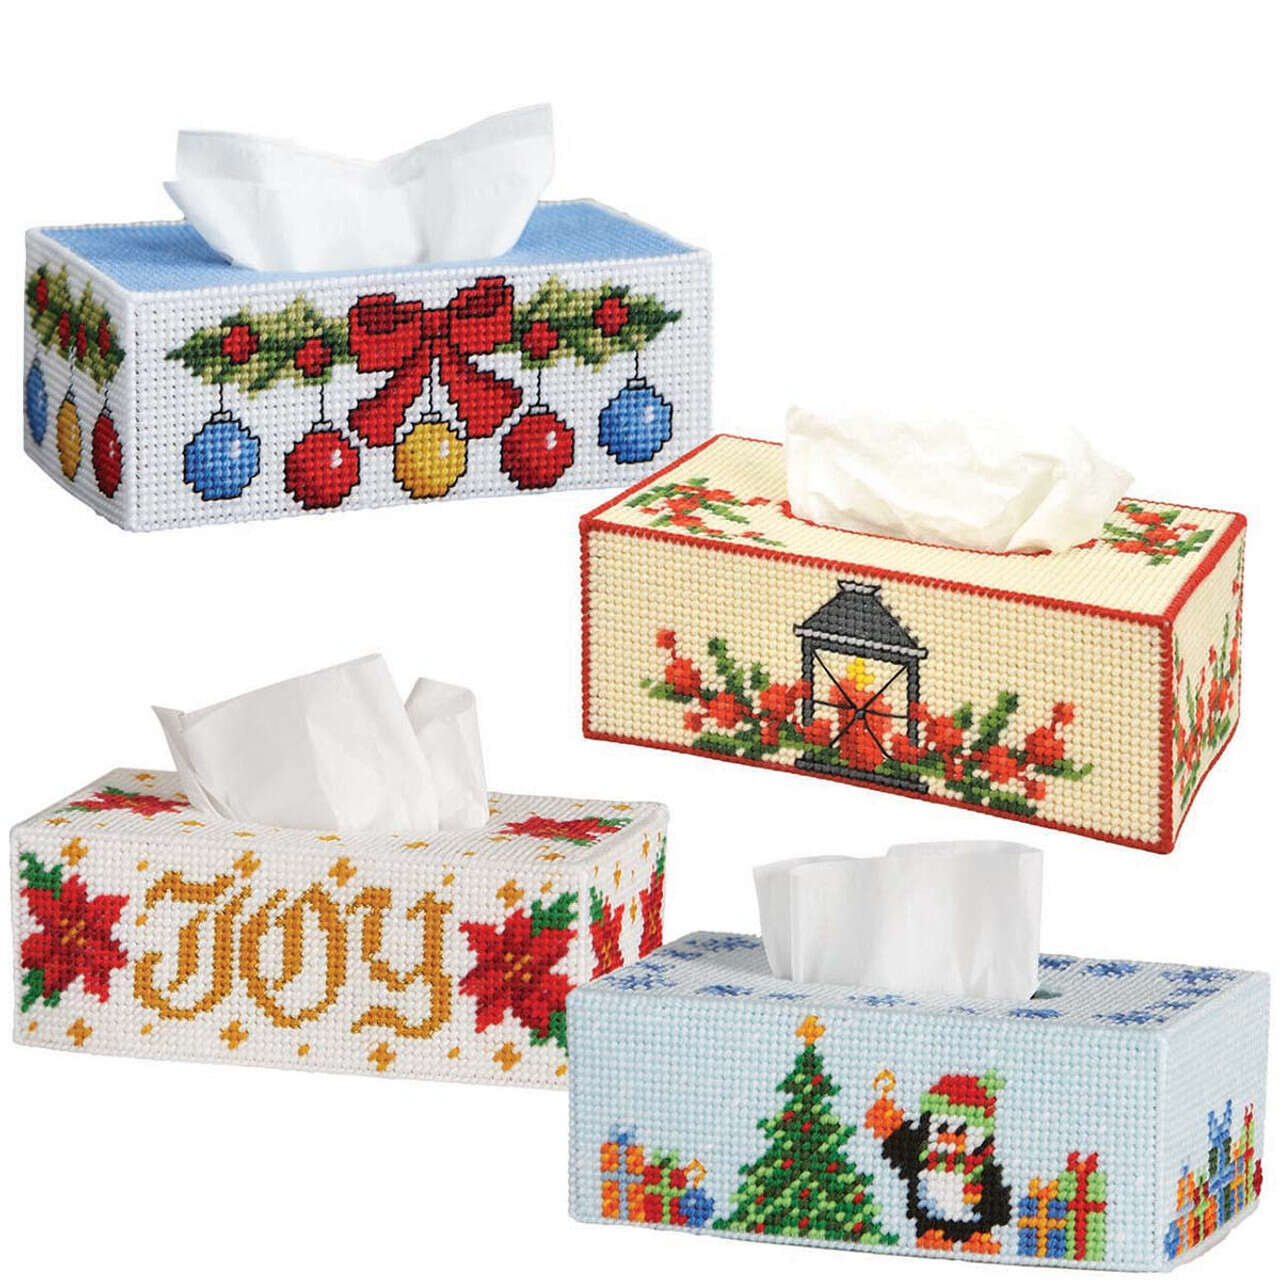 Tissue Cover Patterns in Plastic Canvas in a Variety of Designs